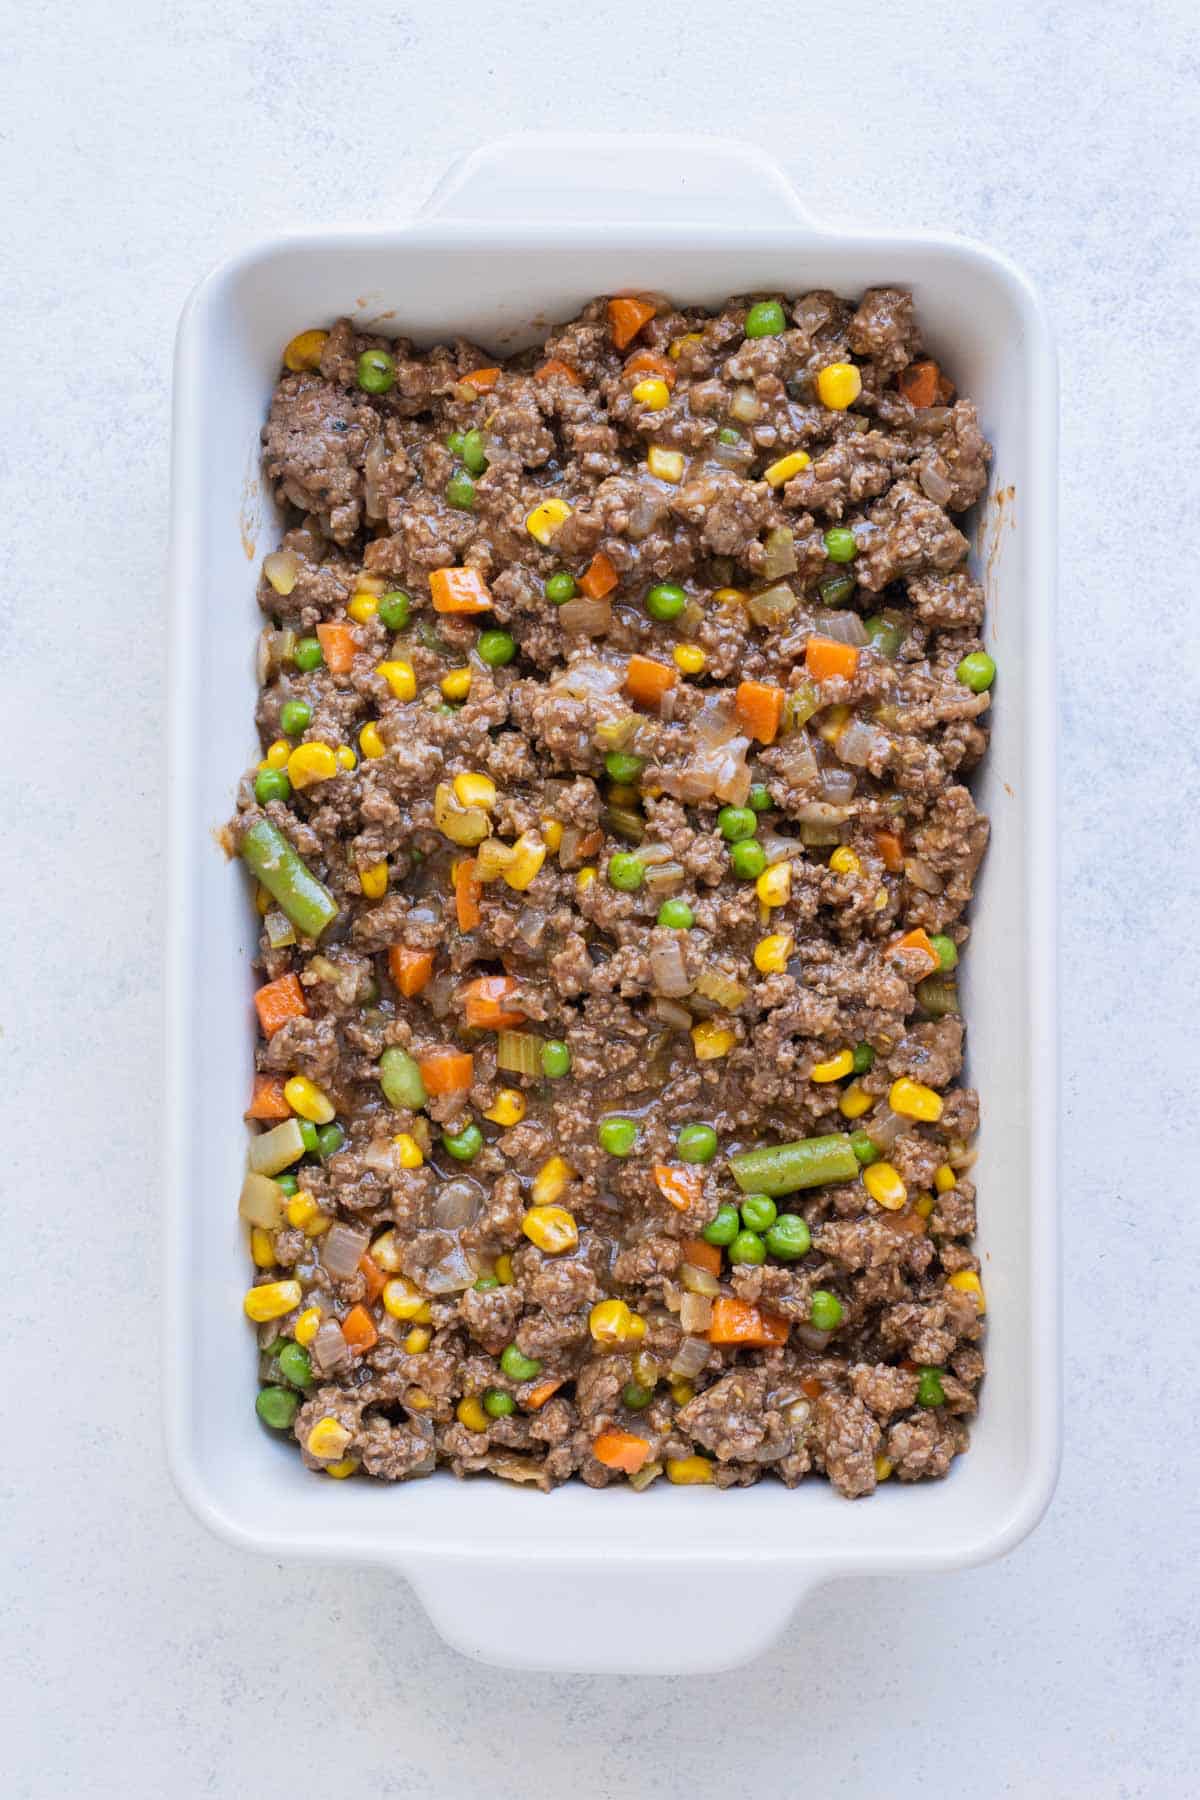 A meat mixture is spread out in a casserole dish.